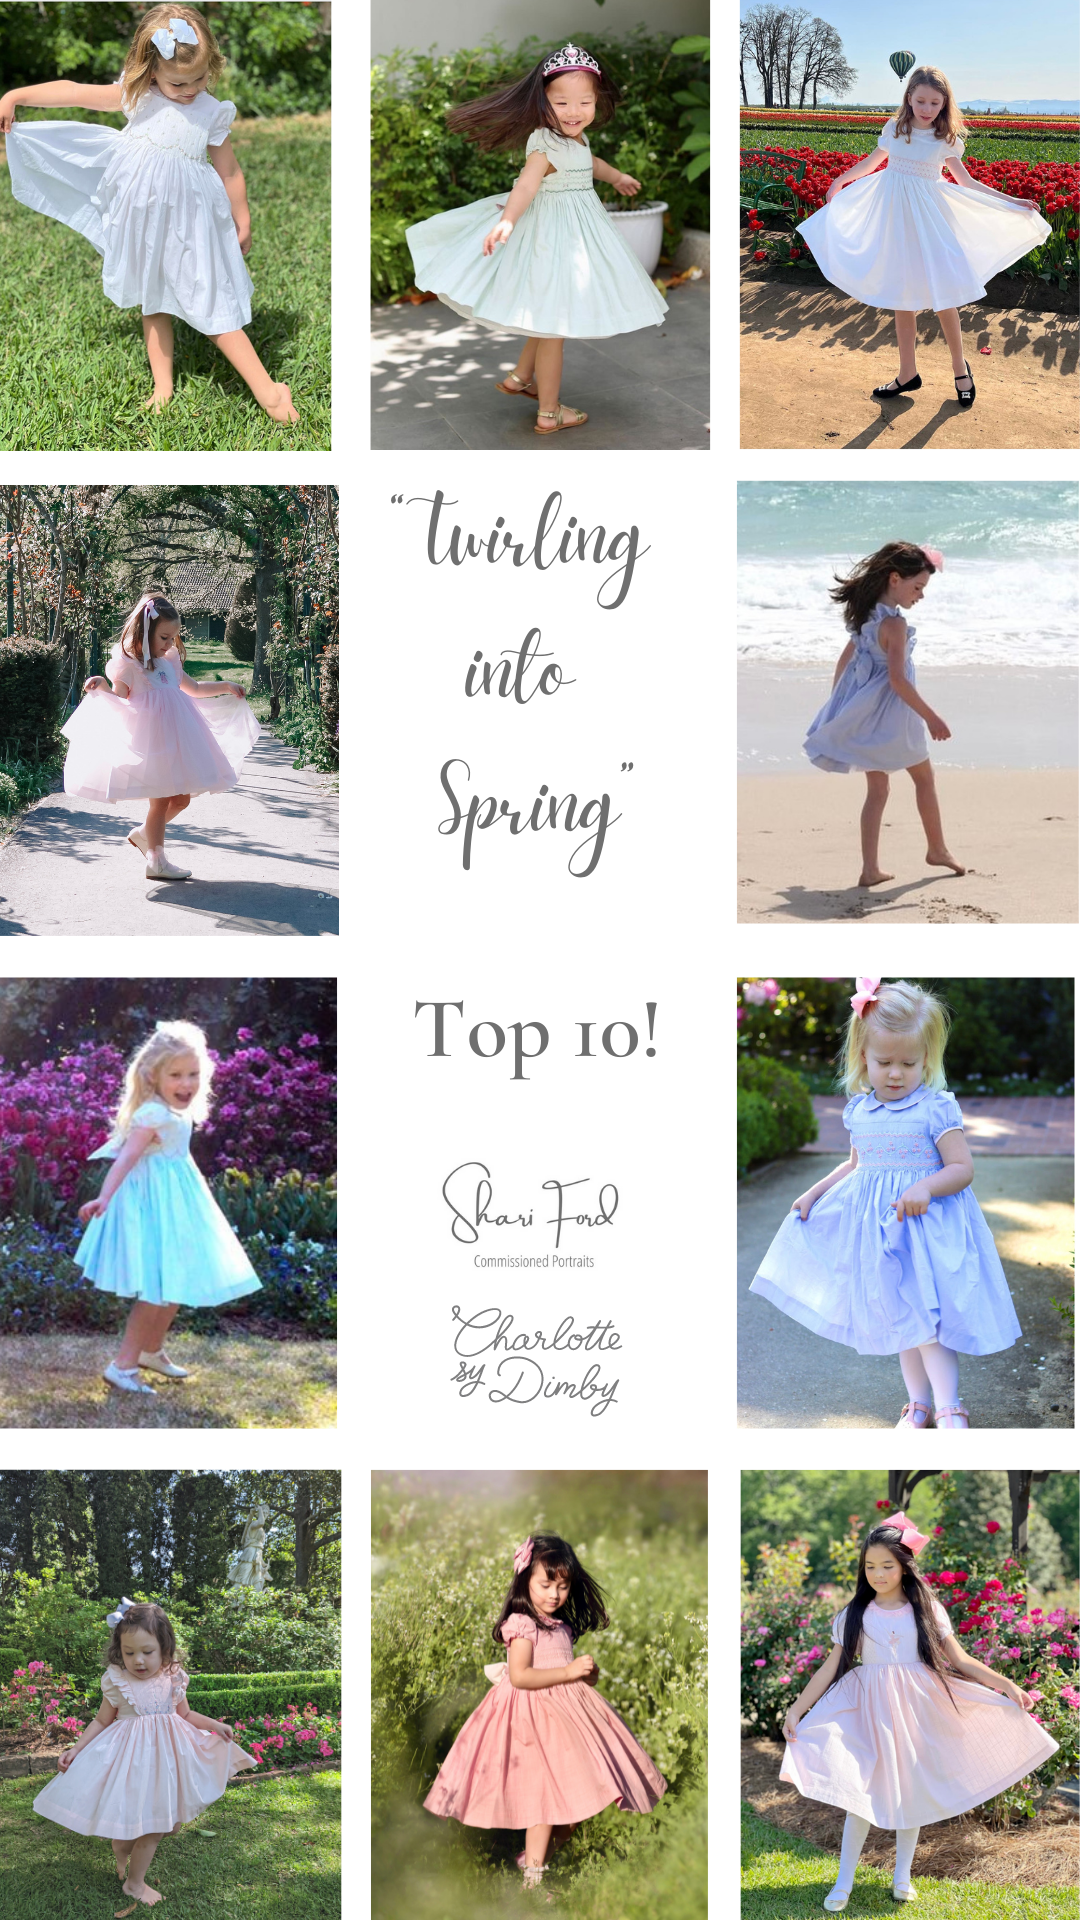 Charlotte sy Dimby classic chic little princess twirling handmade smocked dresses for babies and girls - precious elegant French style heirlooms